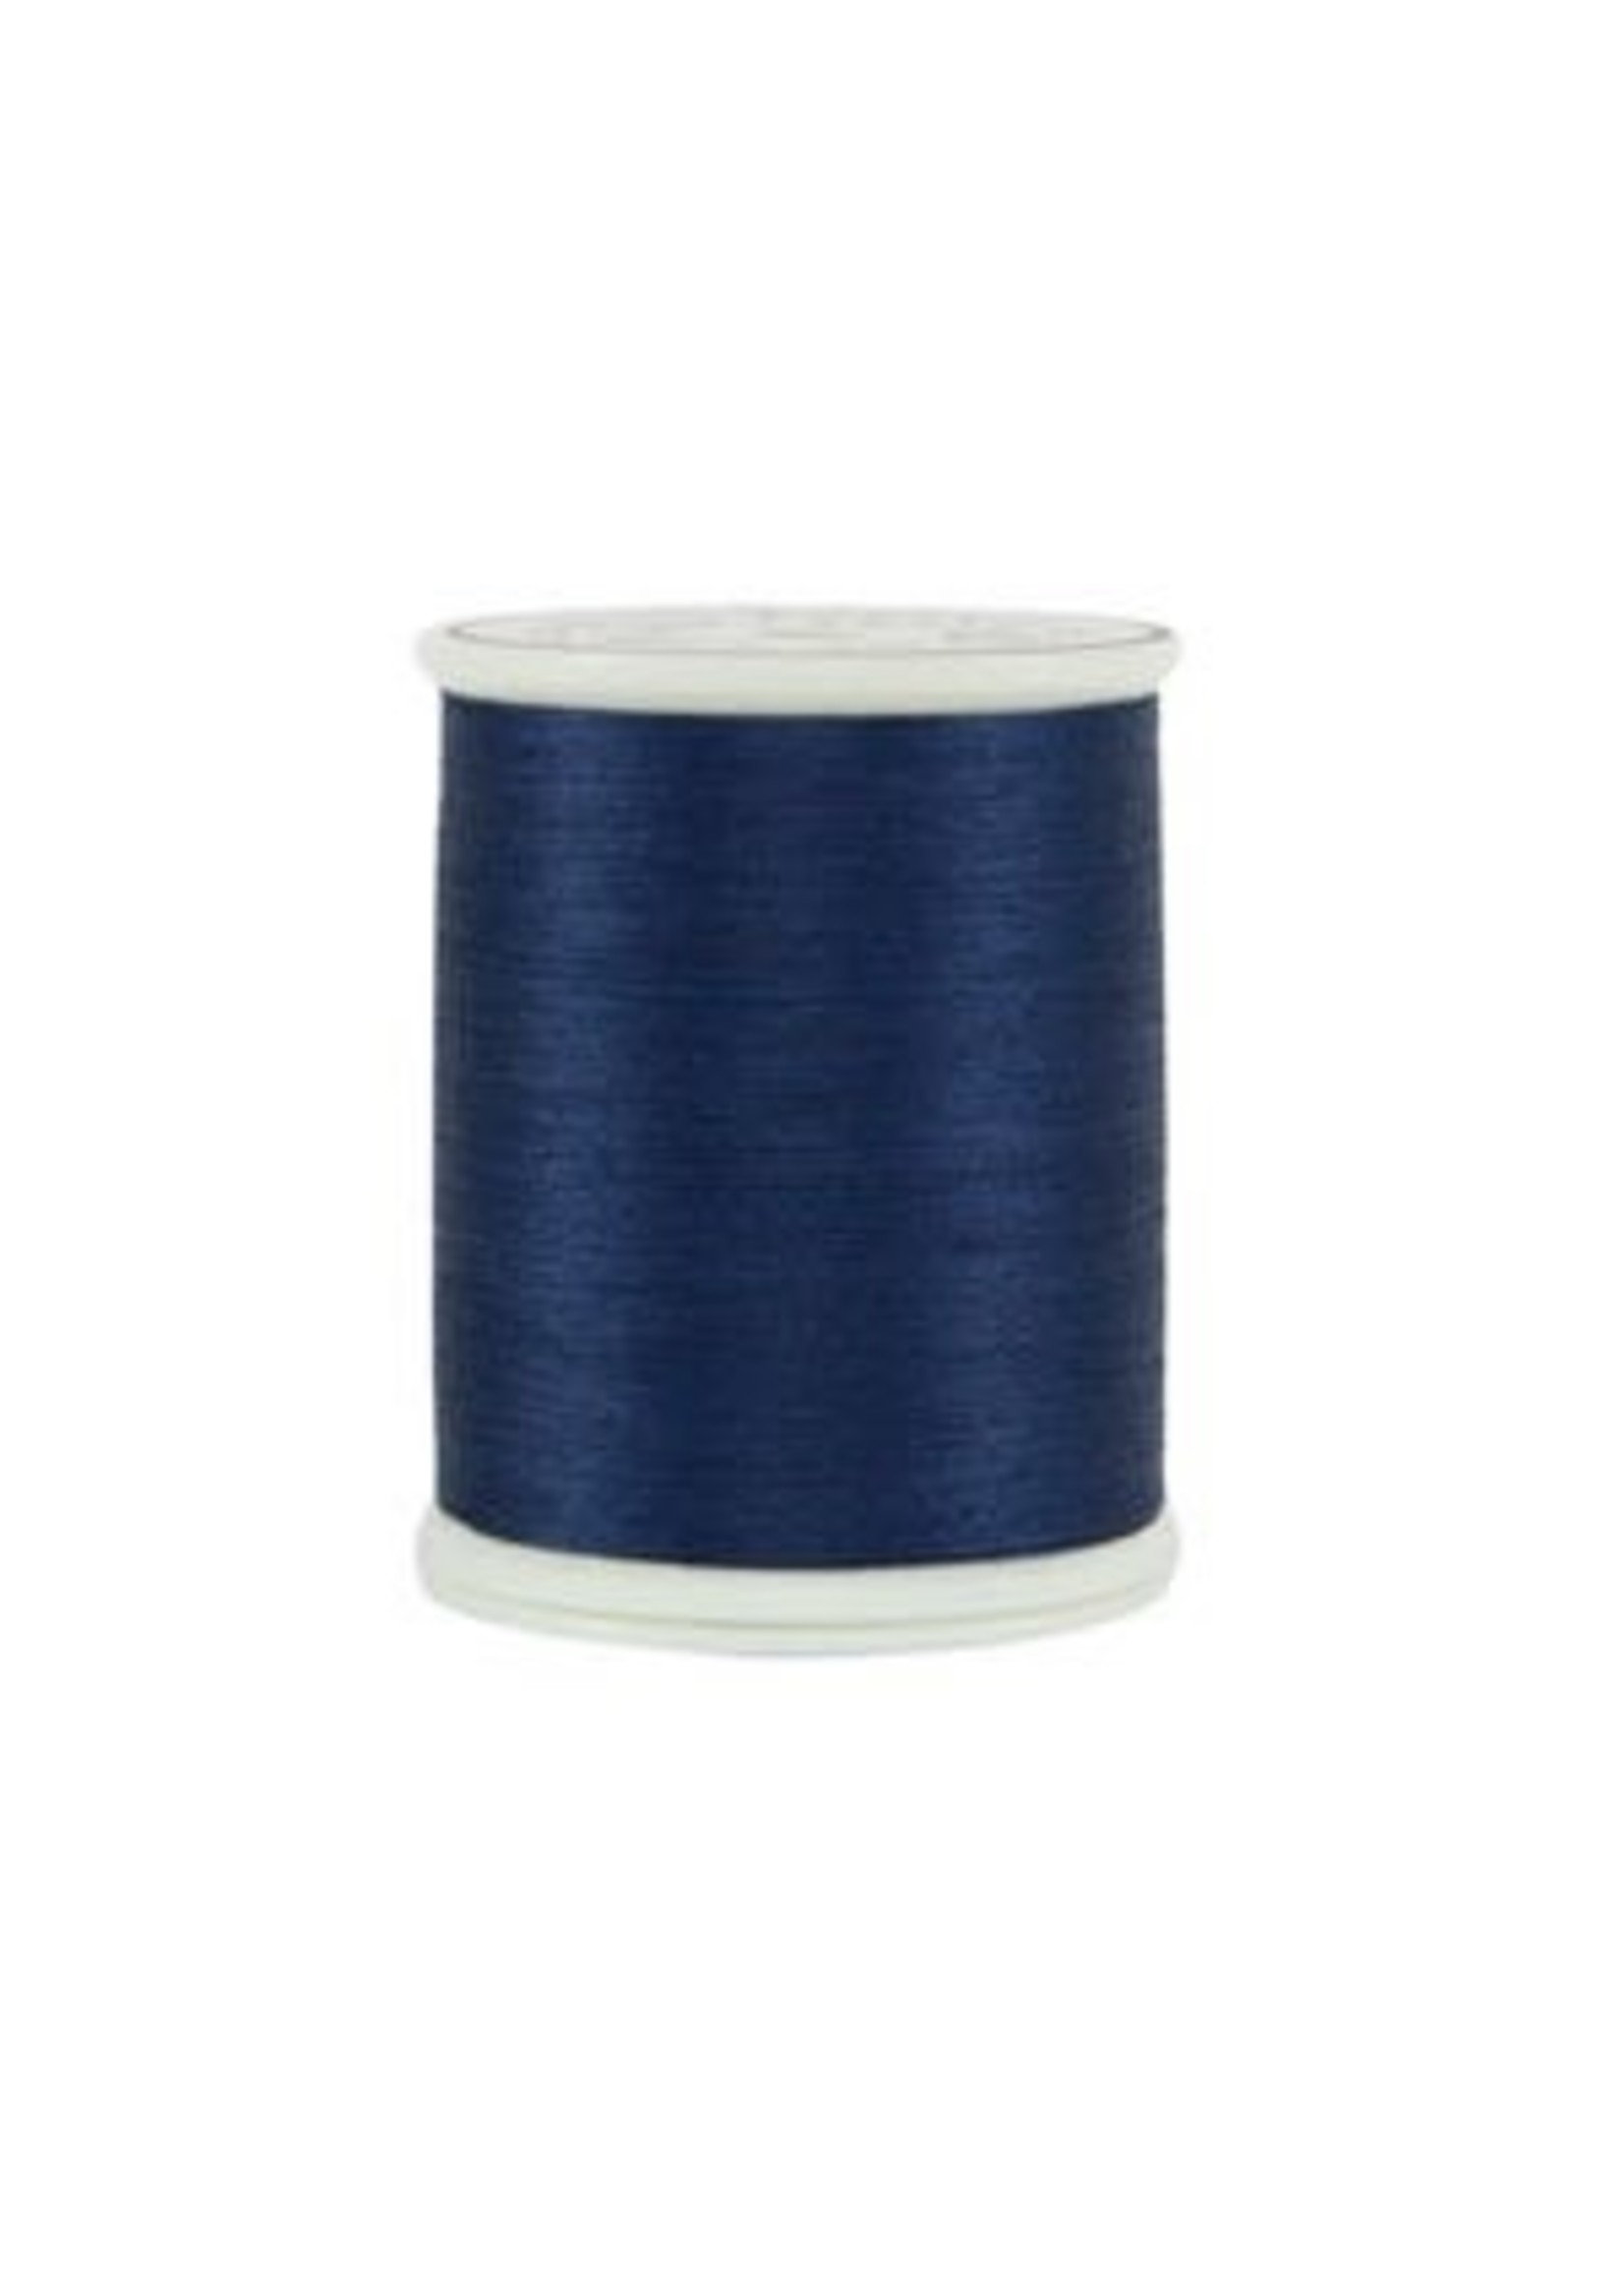 Superior Threads King Tut - #40 - 457 m - 1032 In the Navy